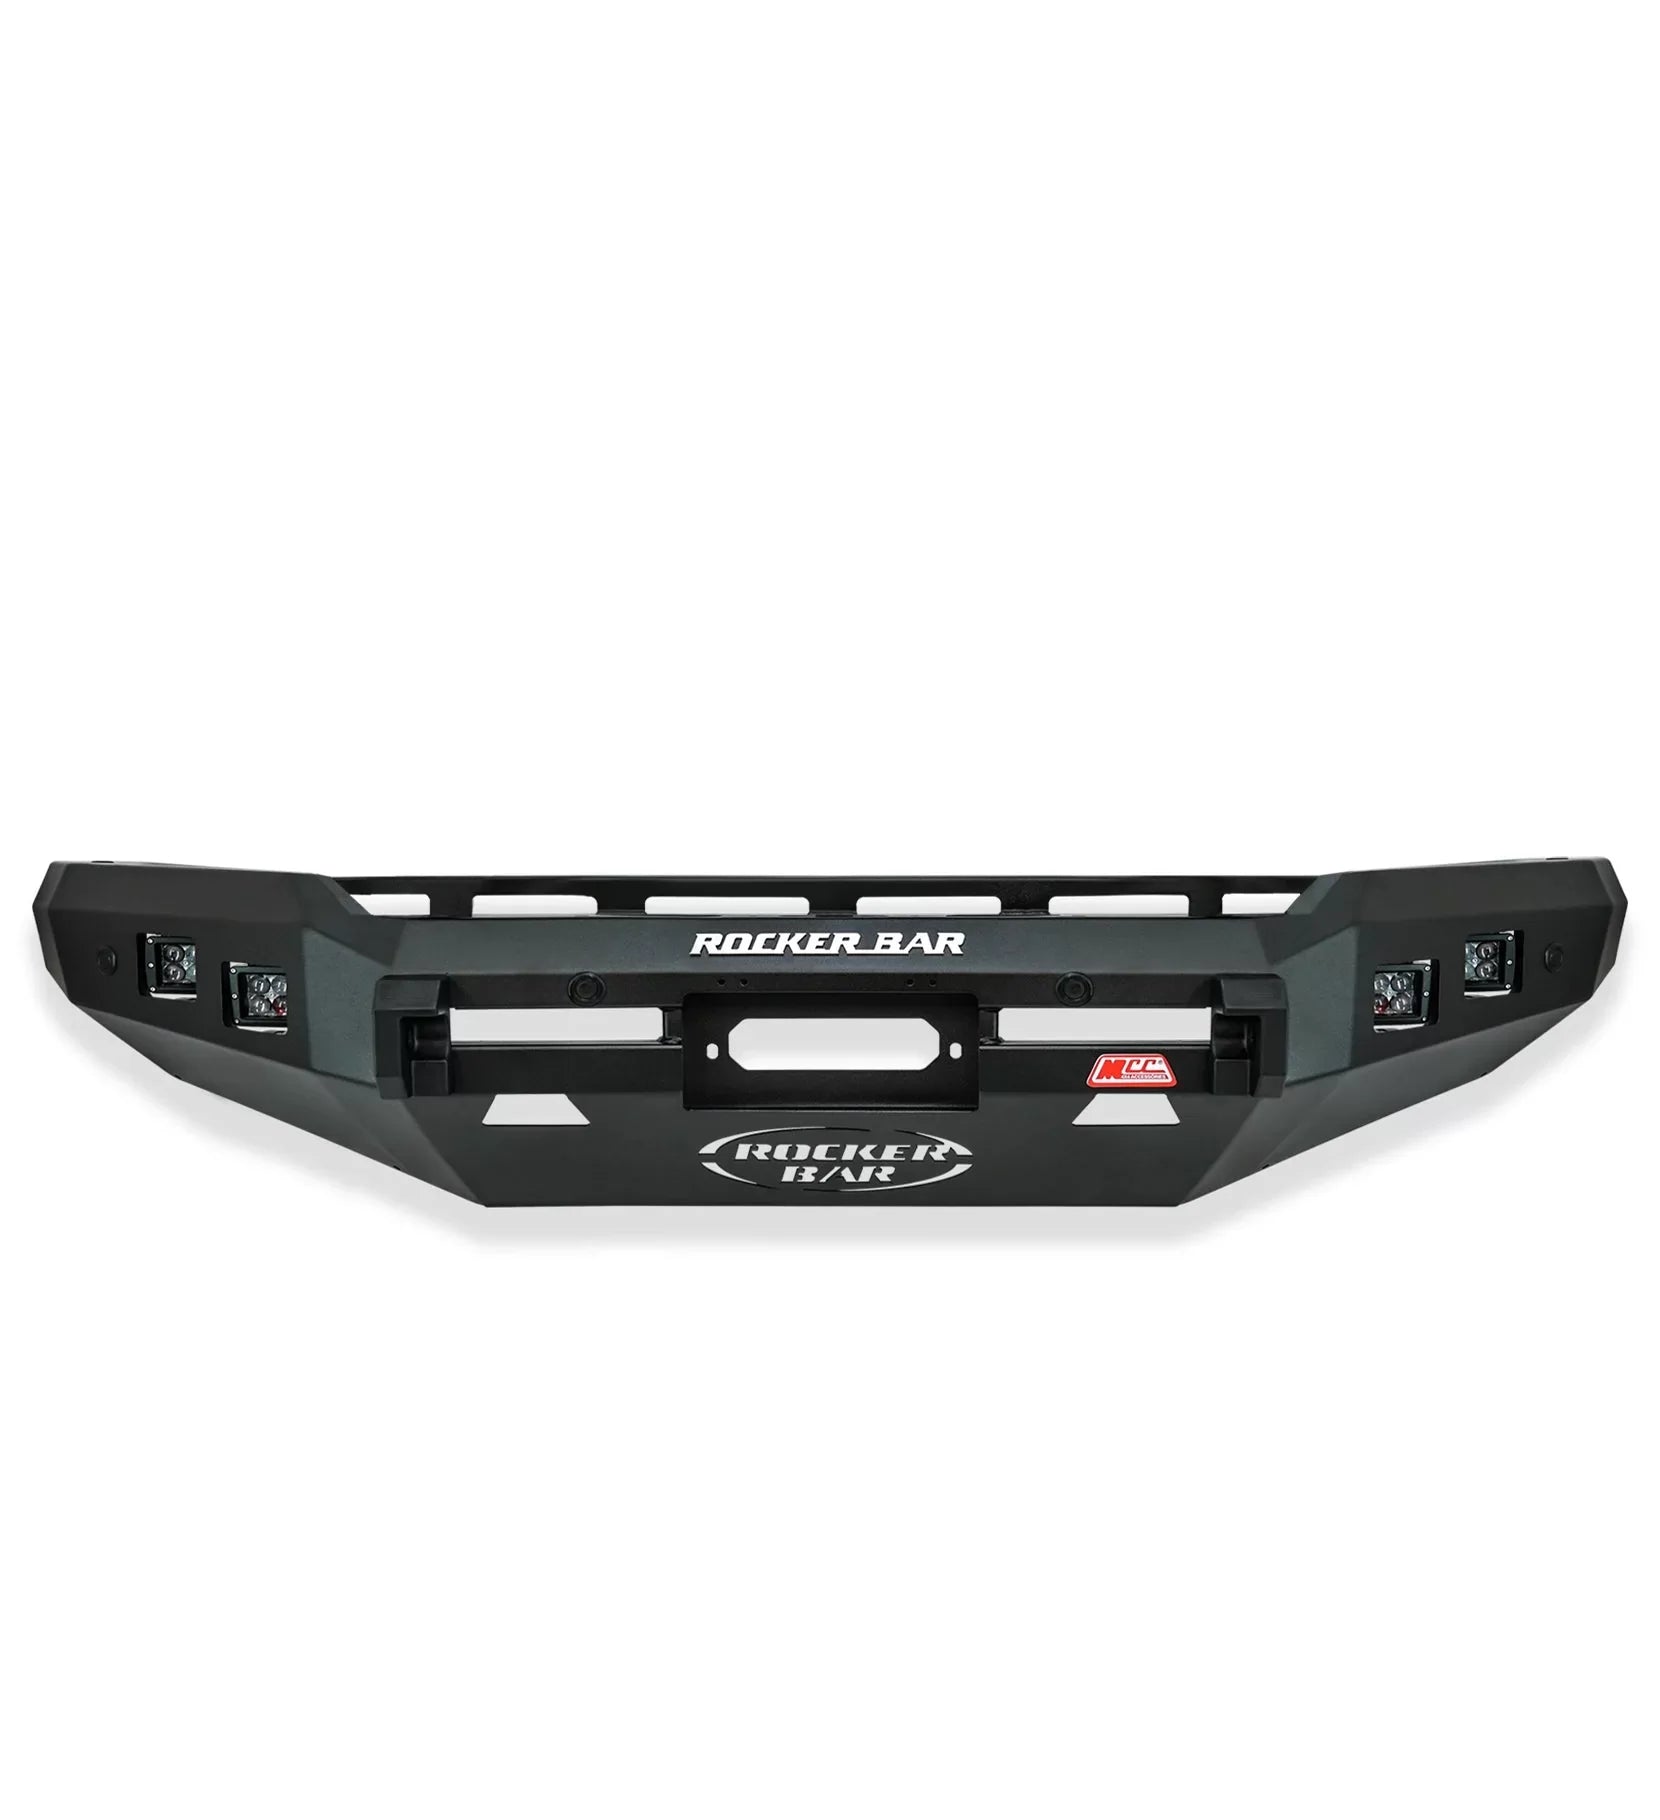 Ranger Px Mk1 12-15 078-01sq Rocker Front Bar Square Light No Loop + Bracket + Underprotection Plate If Available